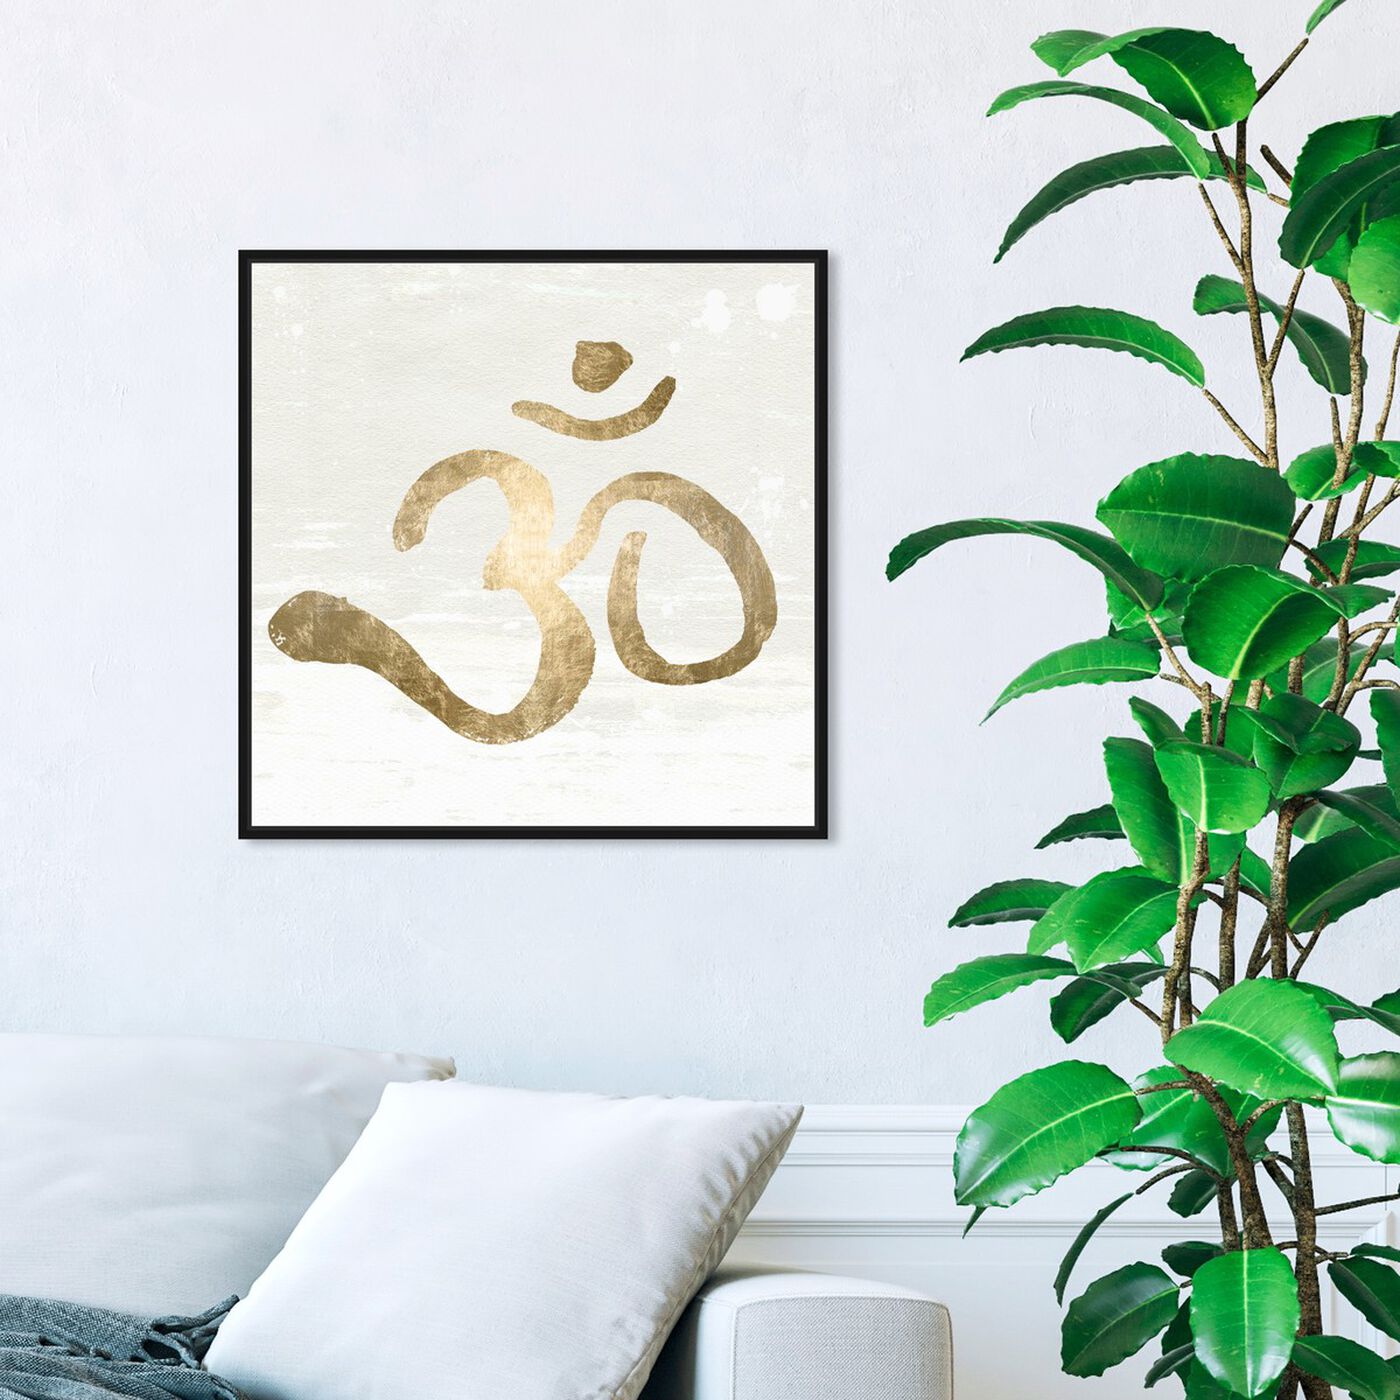 Hanging view of Ohm Gold Blanc featuring symbols and objects and mystic symbols art.